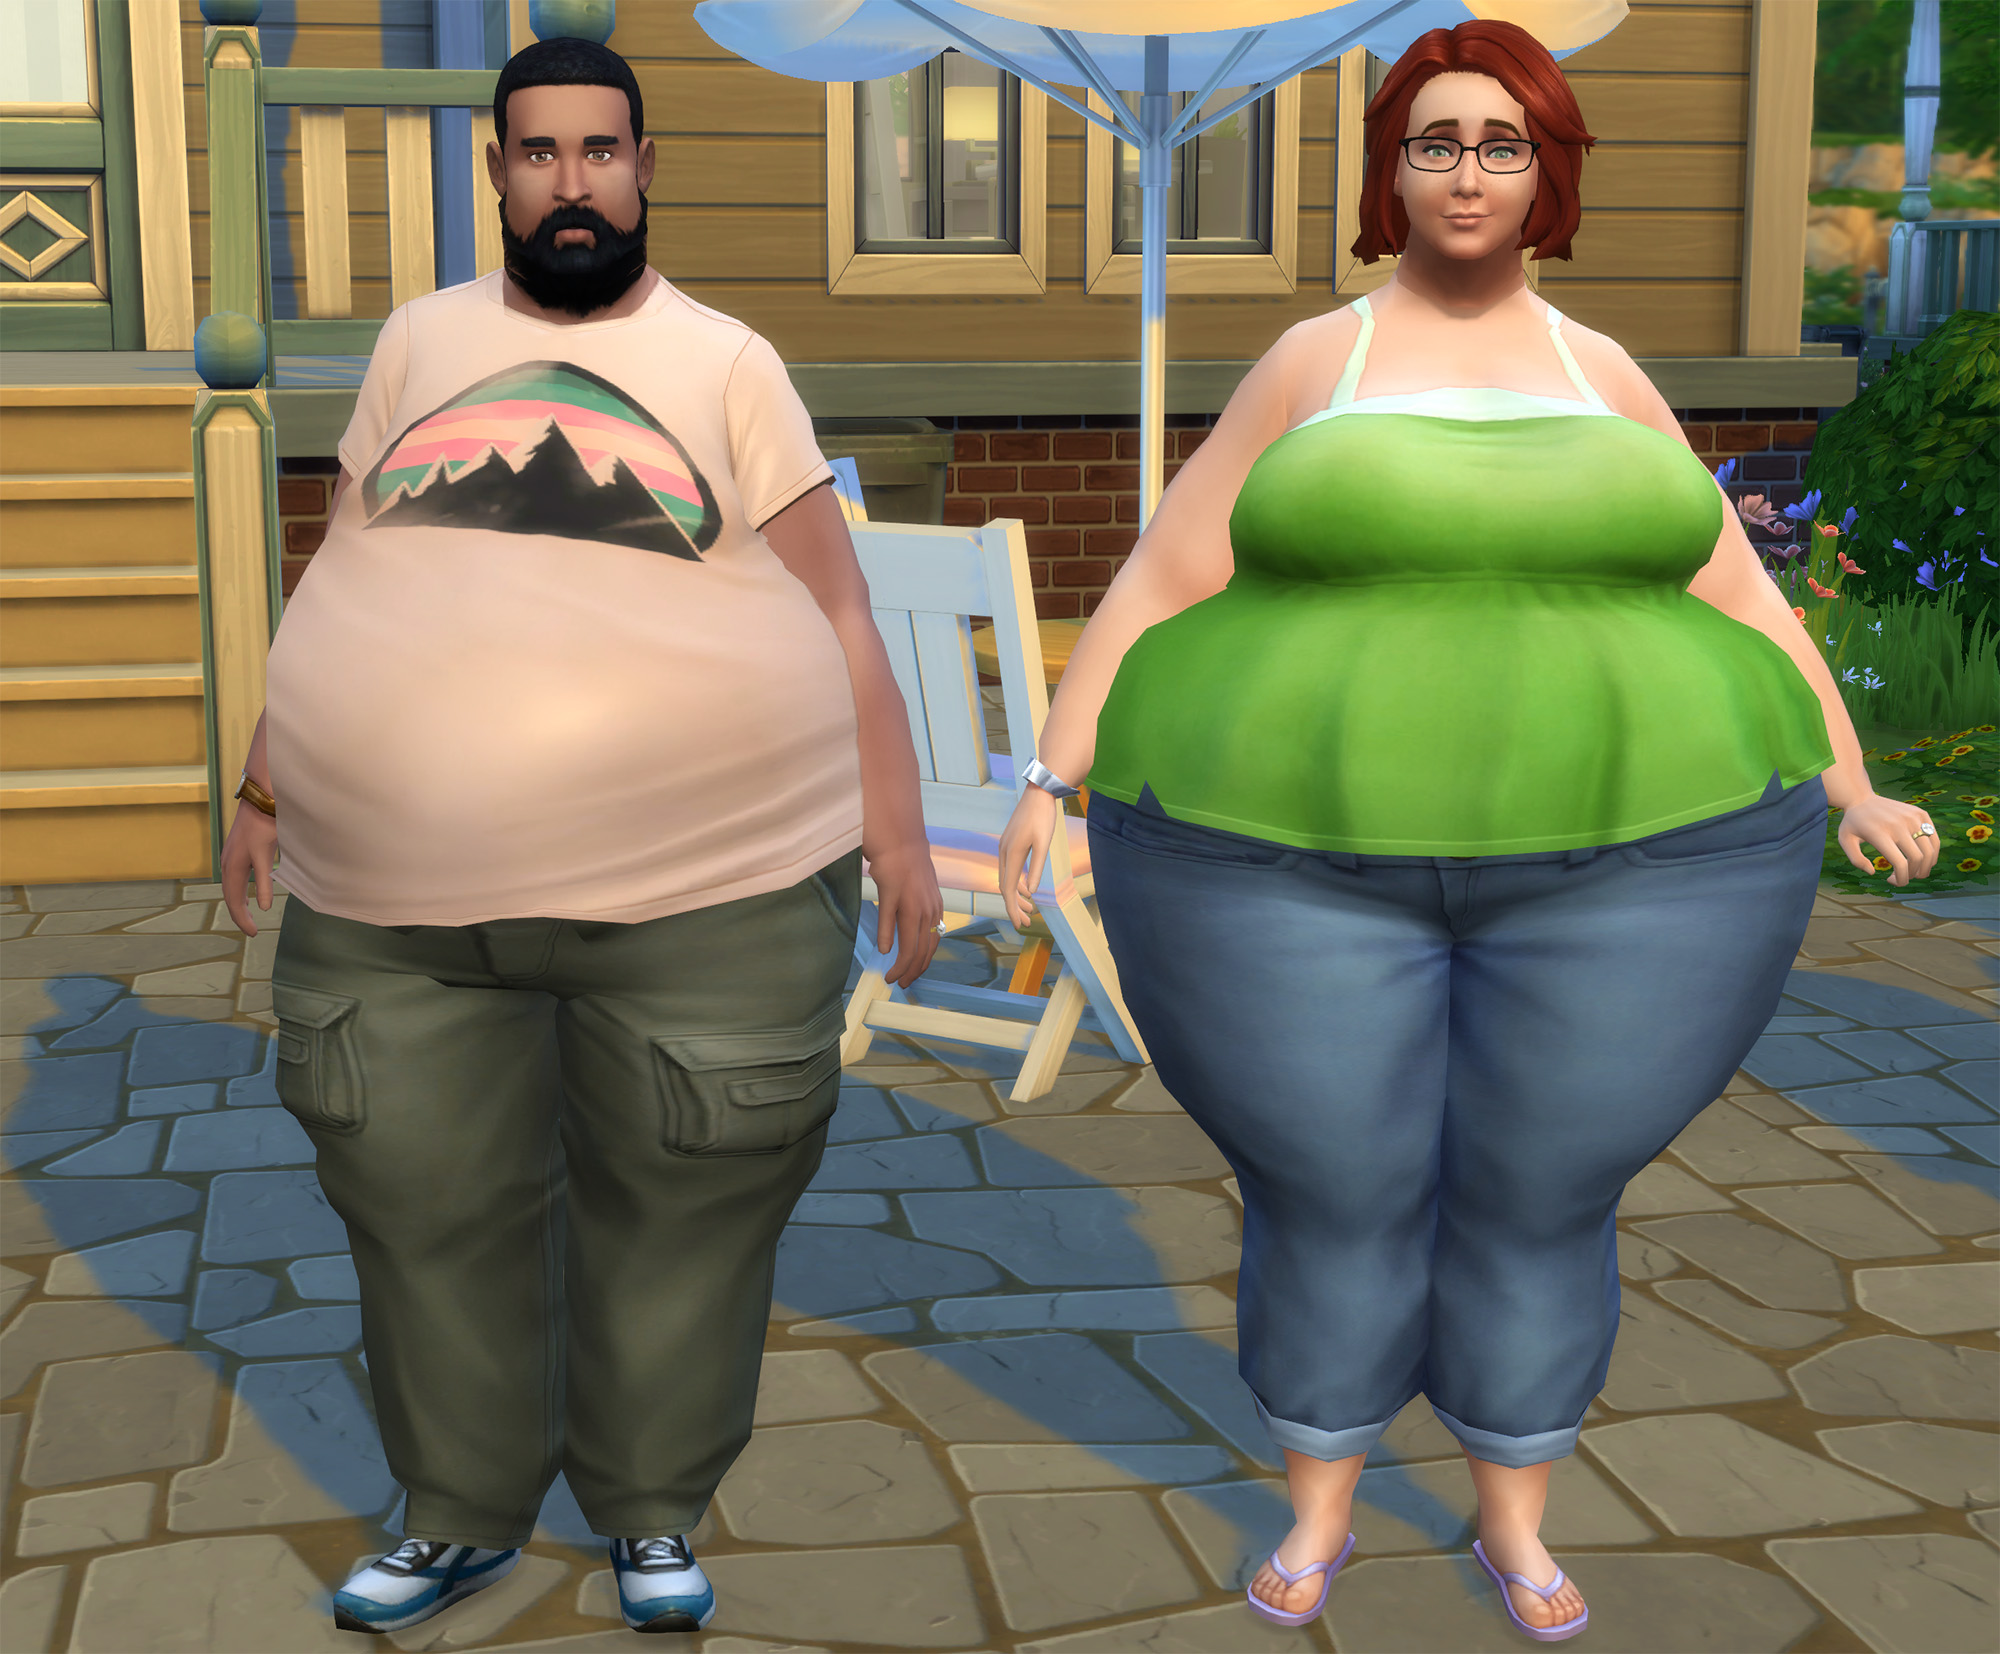 sims 4 extreme sliders mod